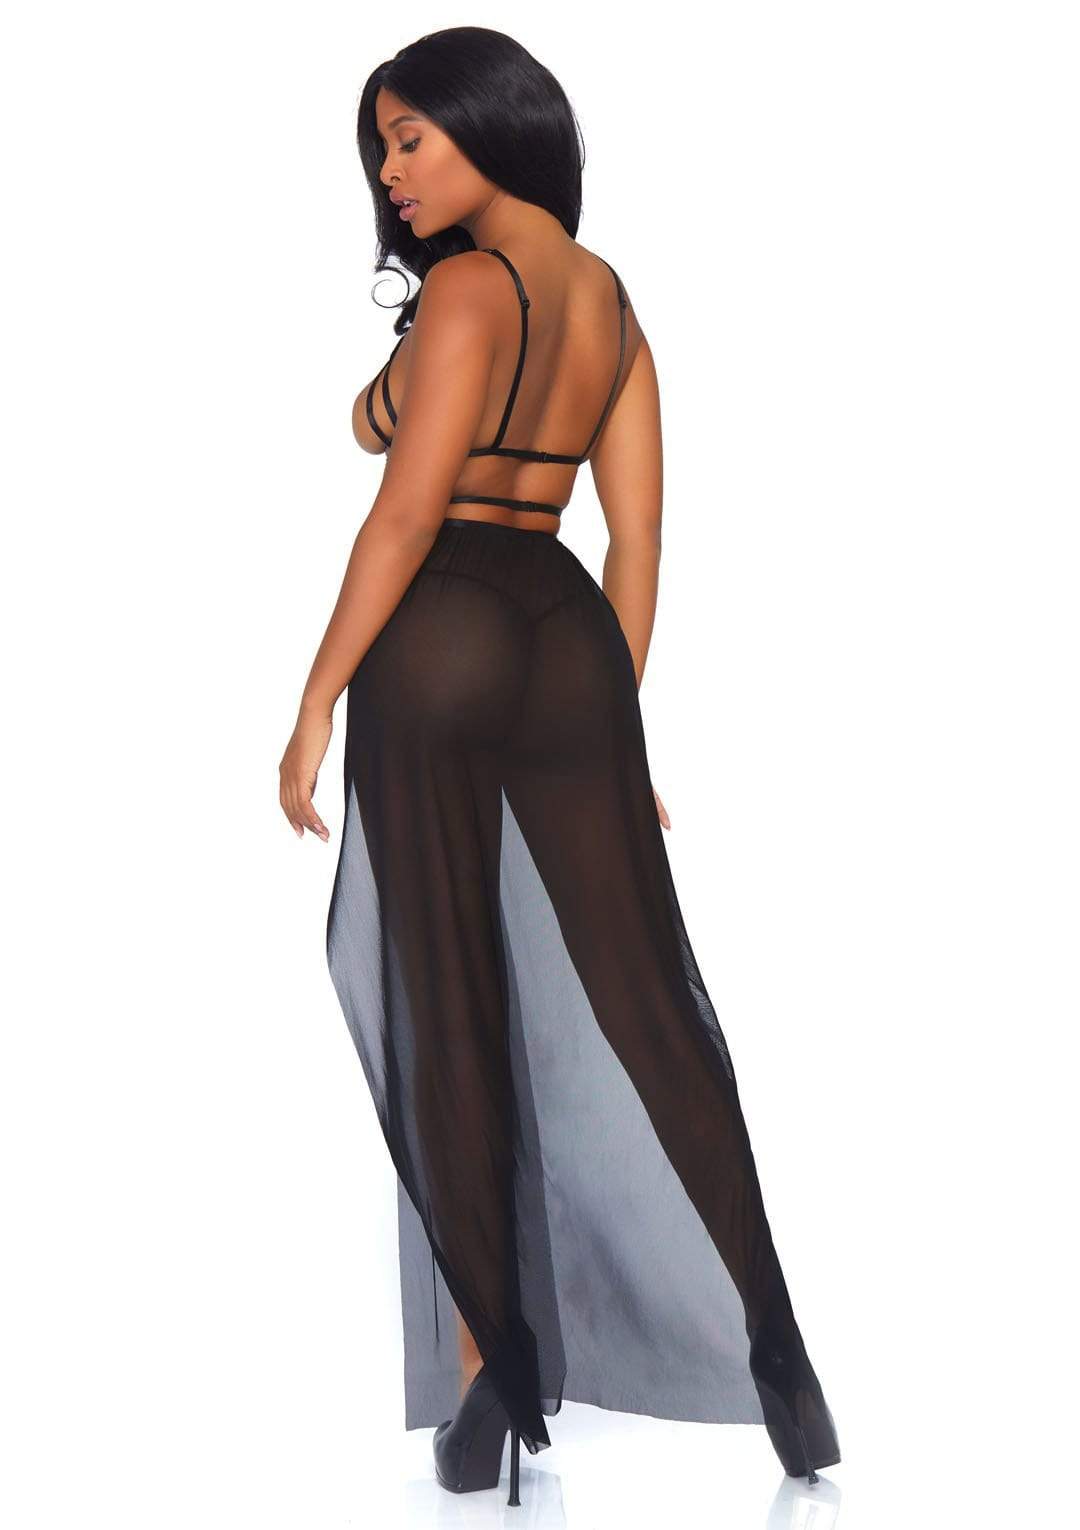 Cage Strap Maxi Dress with G-String